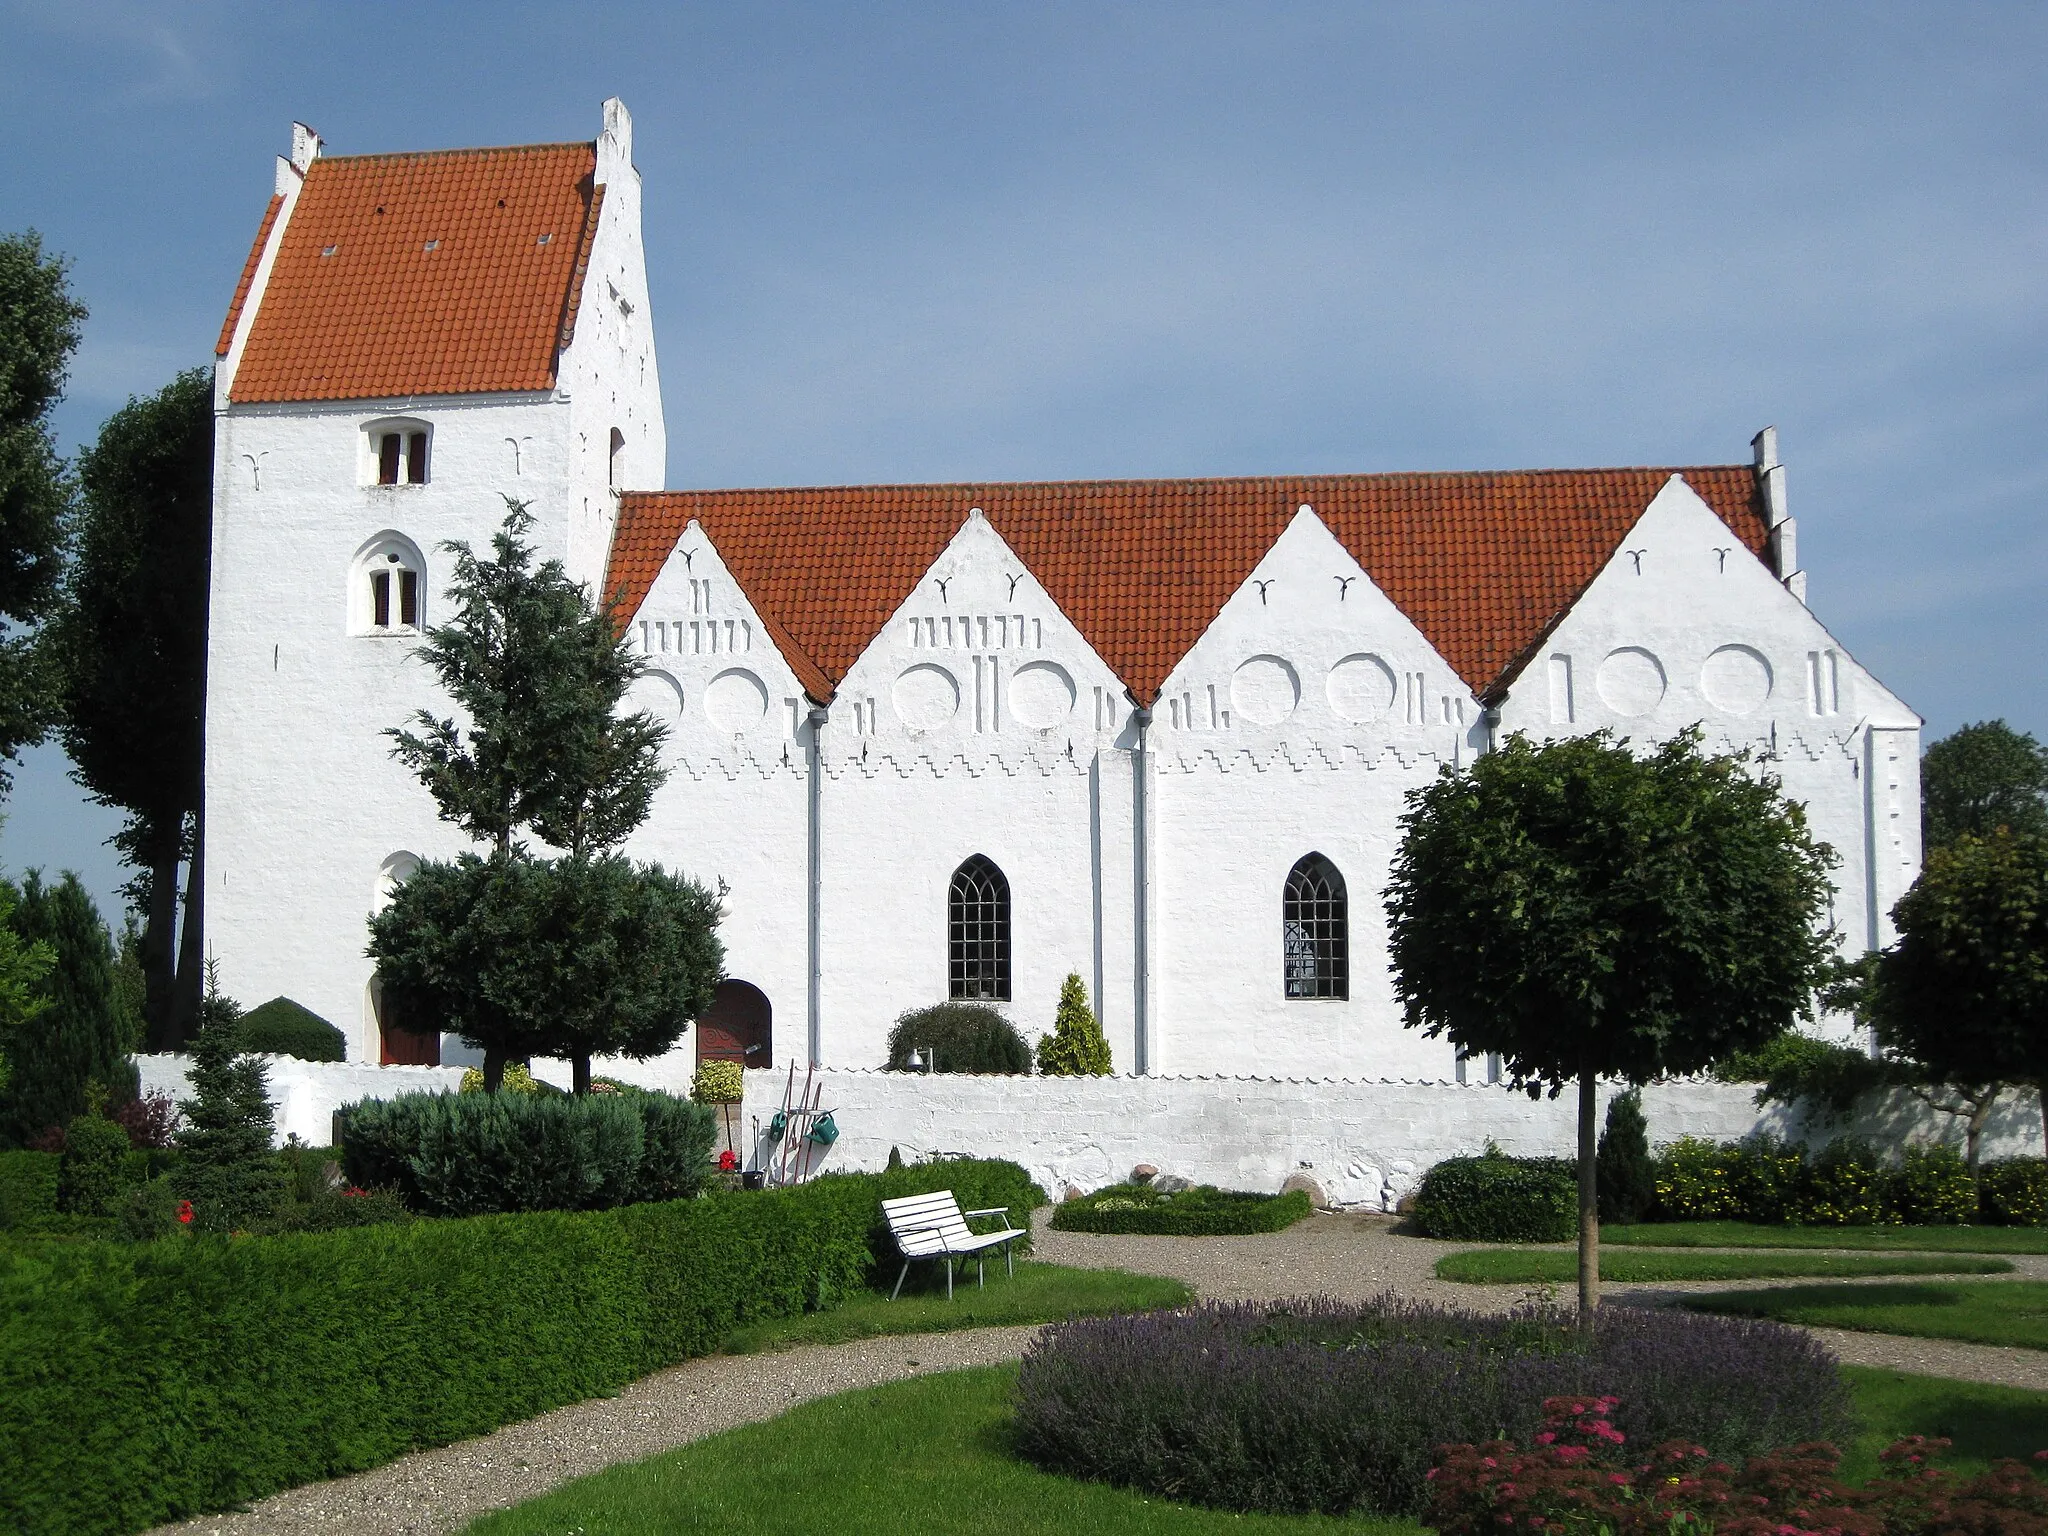 Photo showing: The church "Mern Kirke" in the small town "Mern". The town is located on South Zealand in east Denmark.